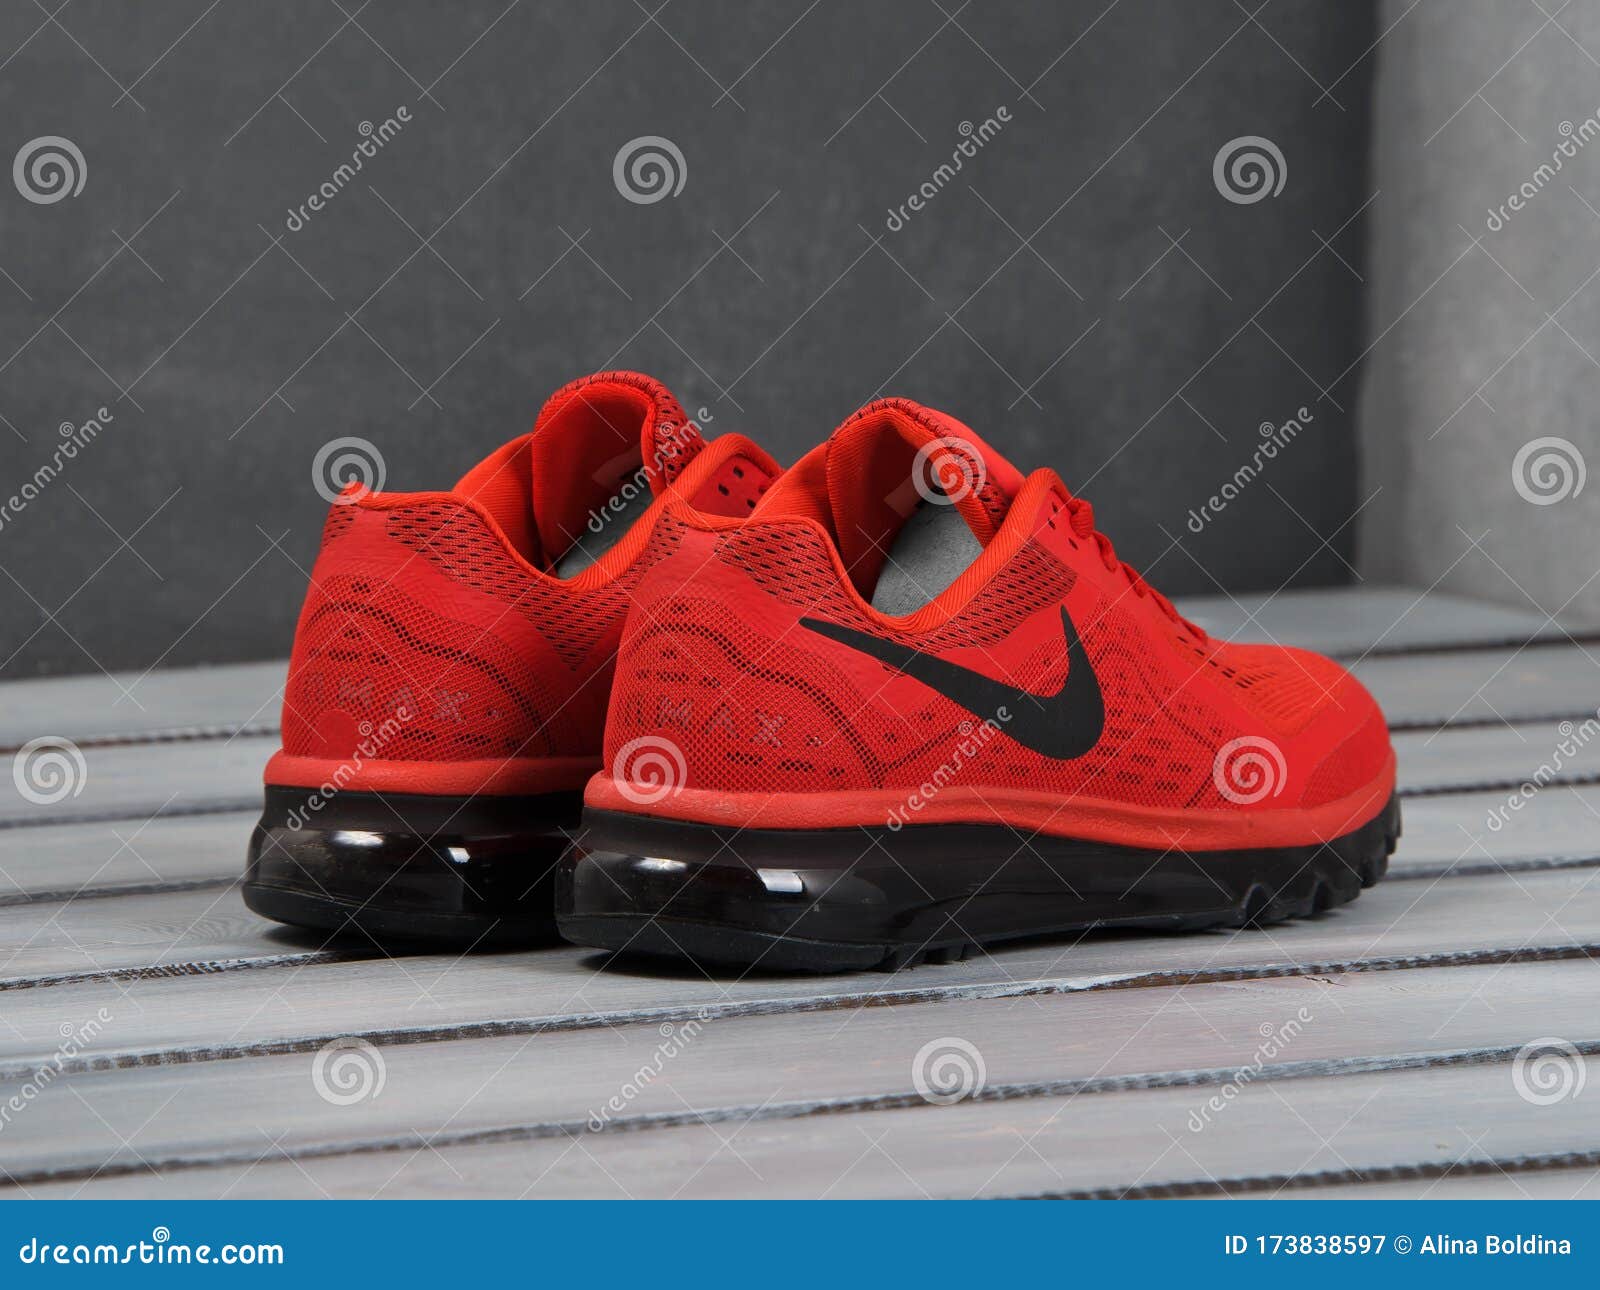 all red air max 2014